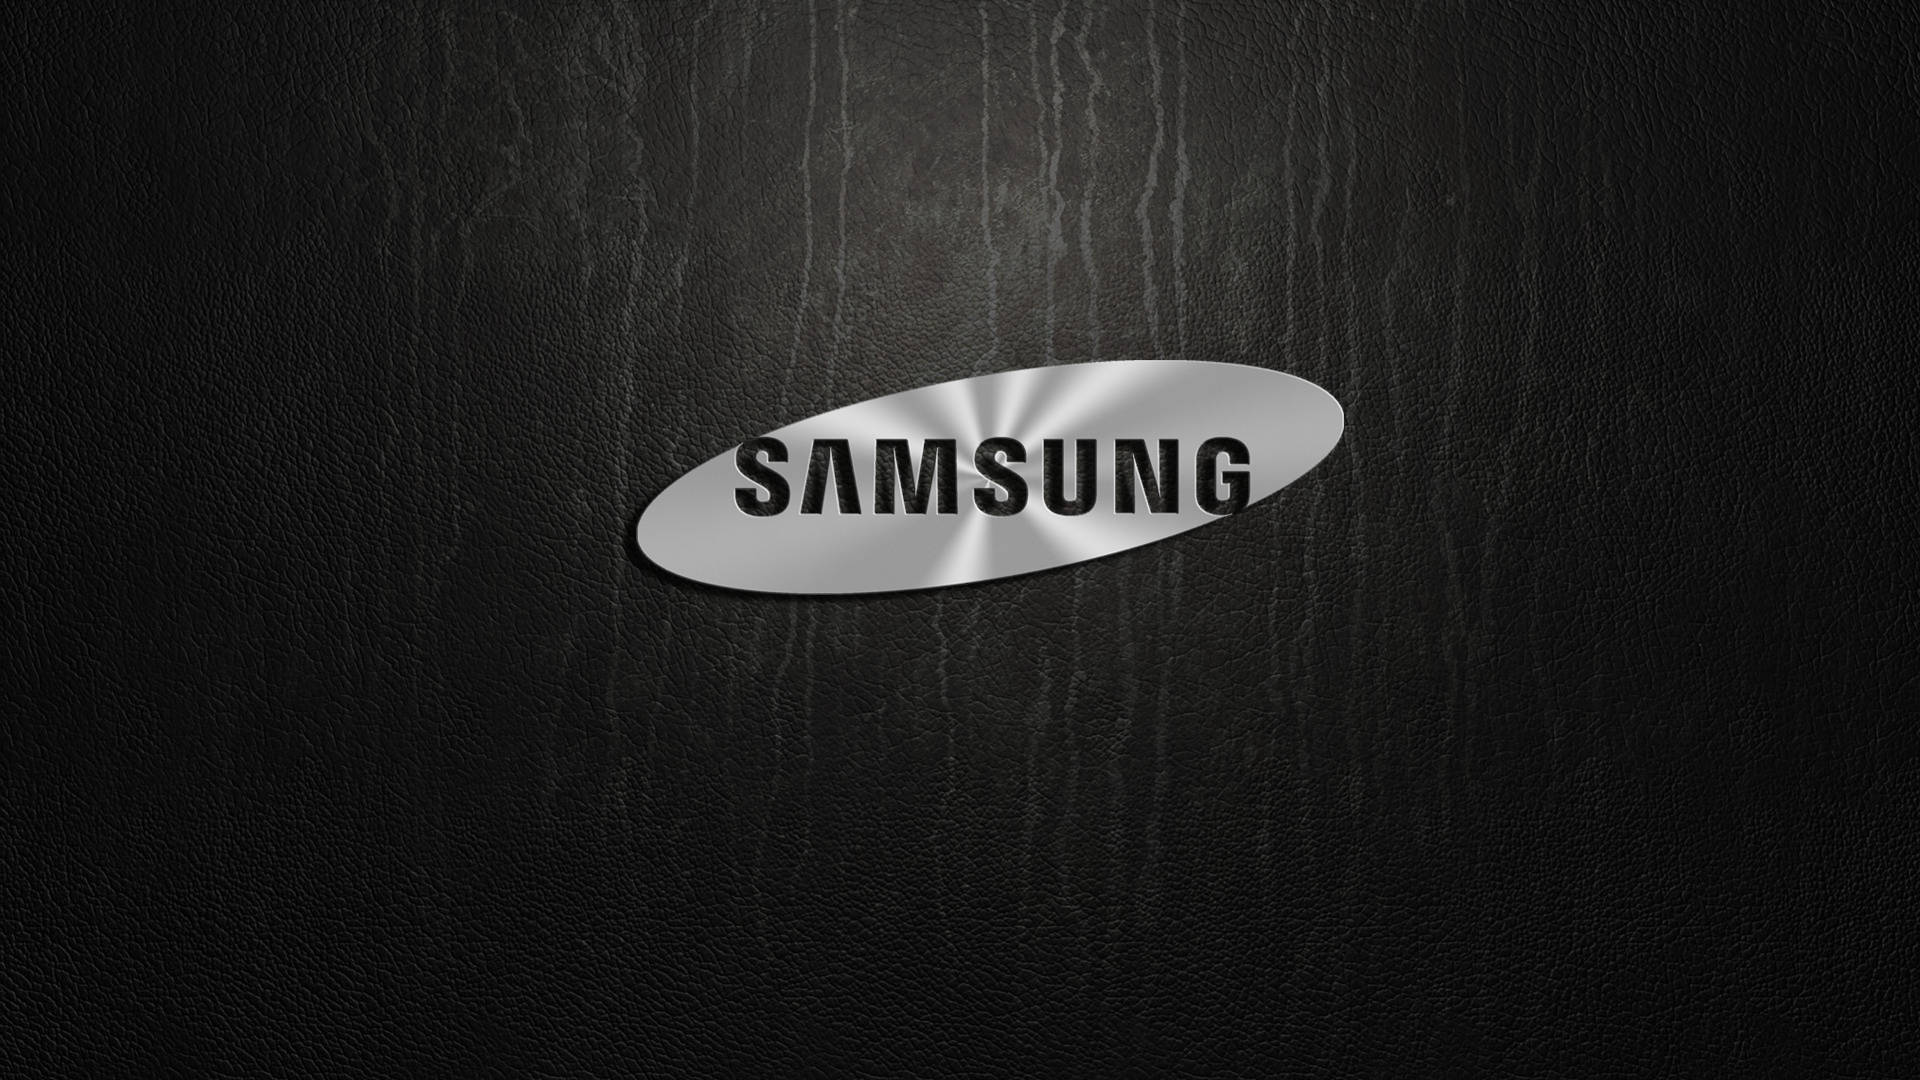 Free Samsung Wallpaper Downloads, [300+] Samsung Wallpapers for FREE |  